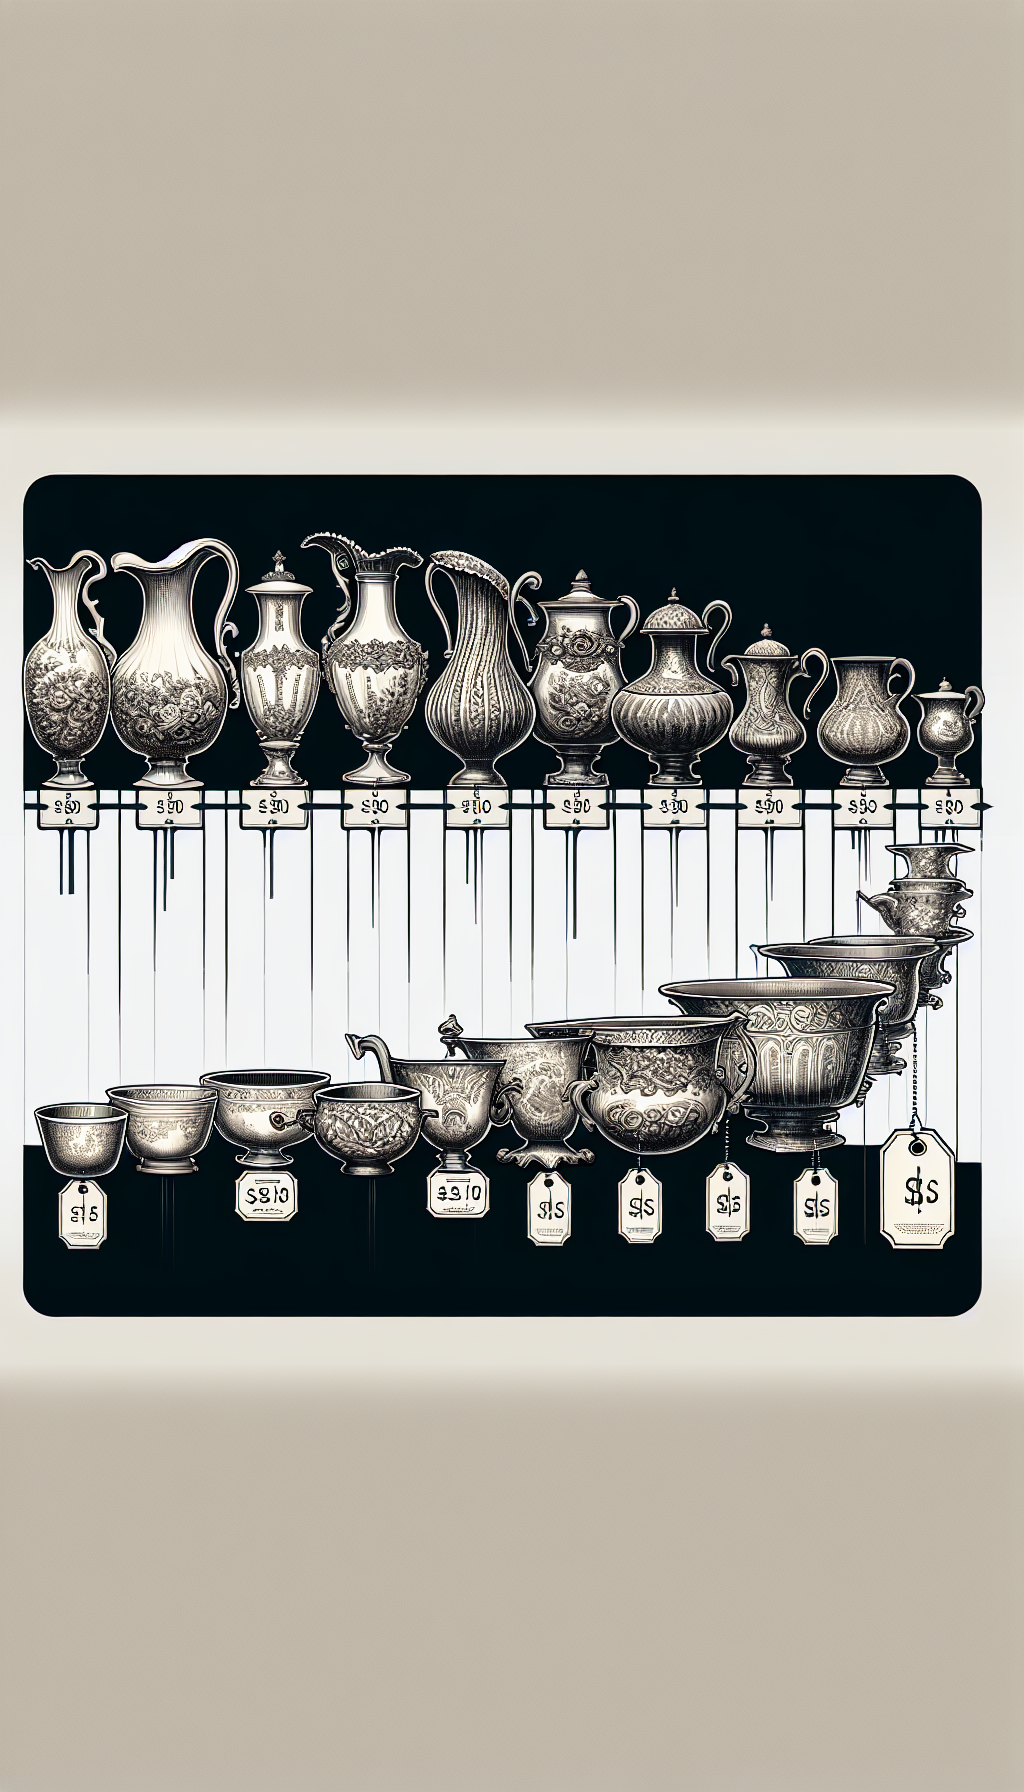 An elegant illustration showcases a timeline with detailed, ornate Victorian pitchers and basins at one end, gradually transitioning to simple, understated Edwardian styles at the other. Amidst them, a translucent price tag weaves through the timeline, changing in size to indicate fluctuating values, subtly blending with each period's design. This suggests the value variations of antique wash basins and pitchers across different historical styles.